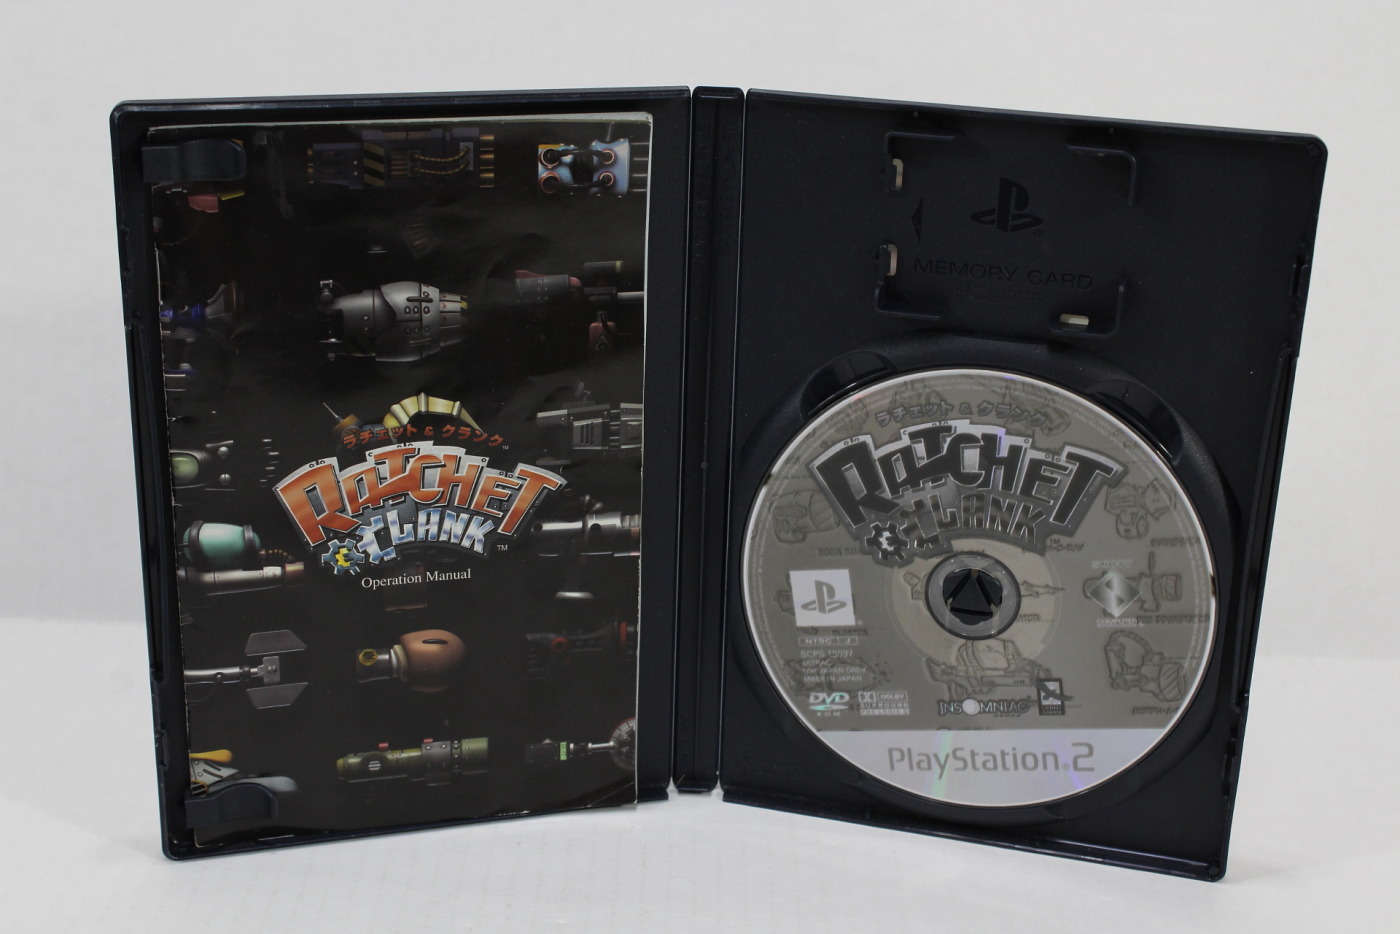 Ratchet Clank (PS2) - PAL - New